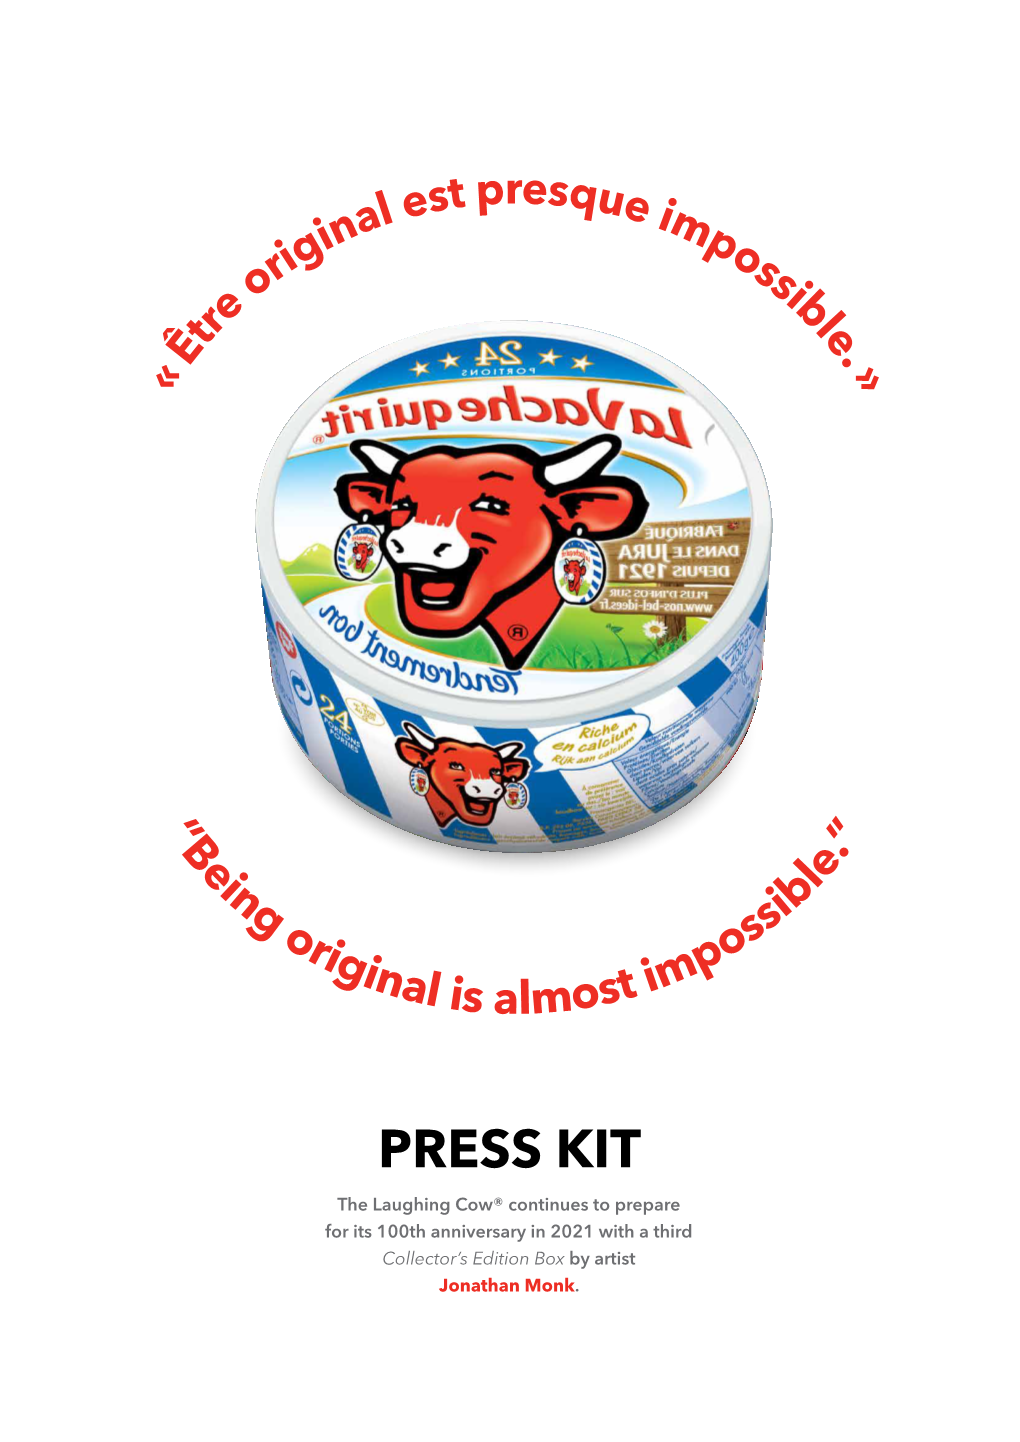 PRESS KIT the Laughing Cow® Continues to Prepare for Its 100Th Anniversary in 2021 with a Third Collector’S Edition Box by Artist Jonathan Monk